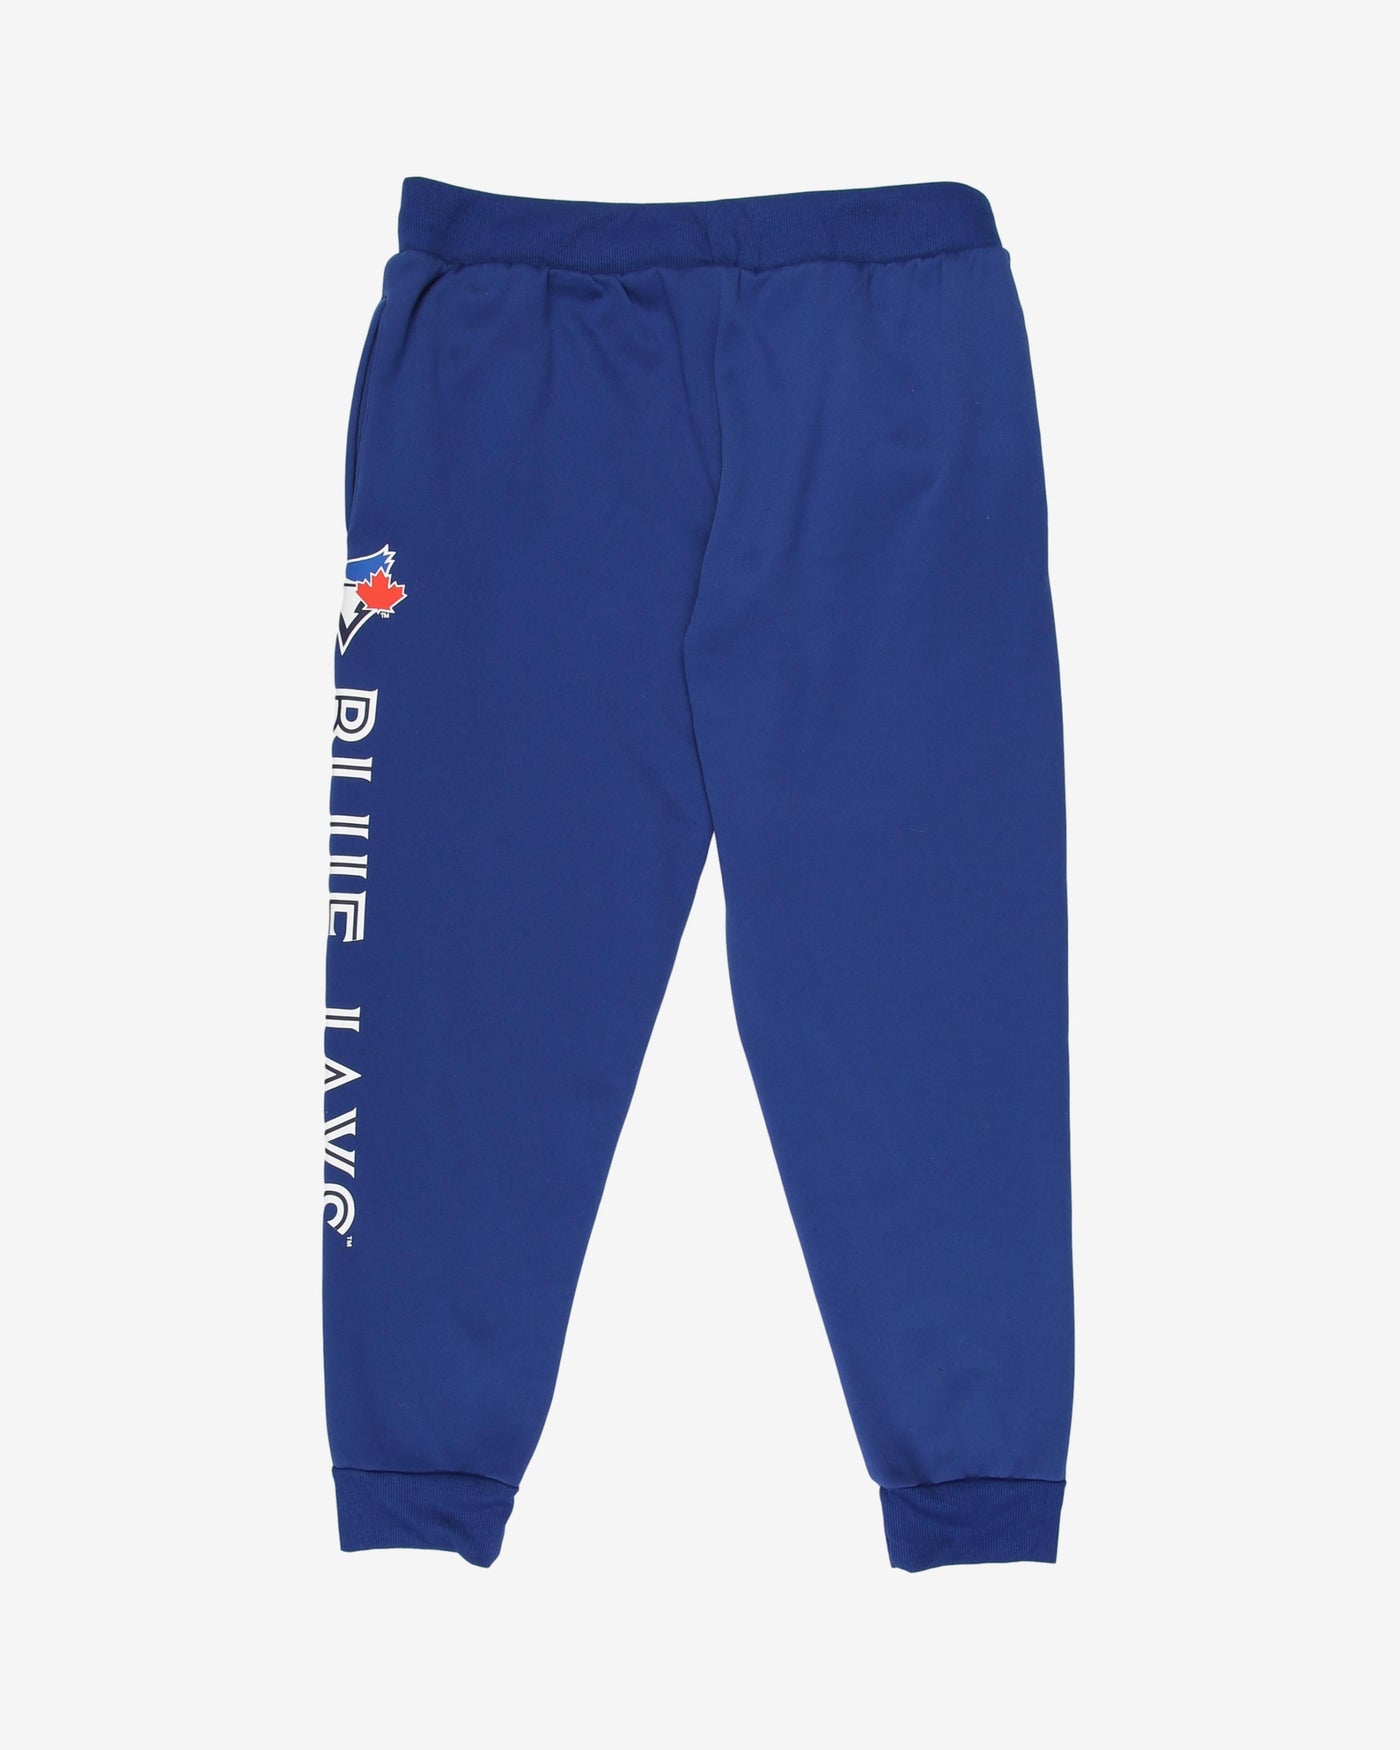 Blue Jays track trousers - S